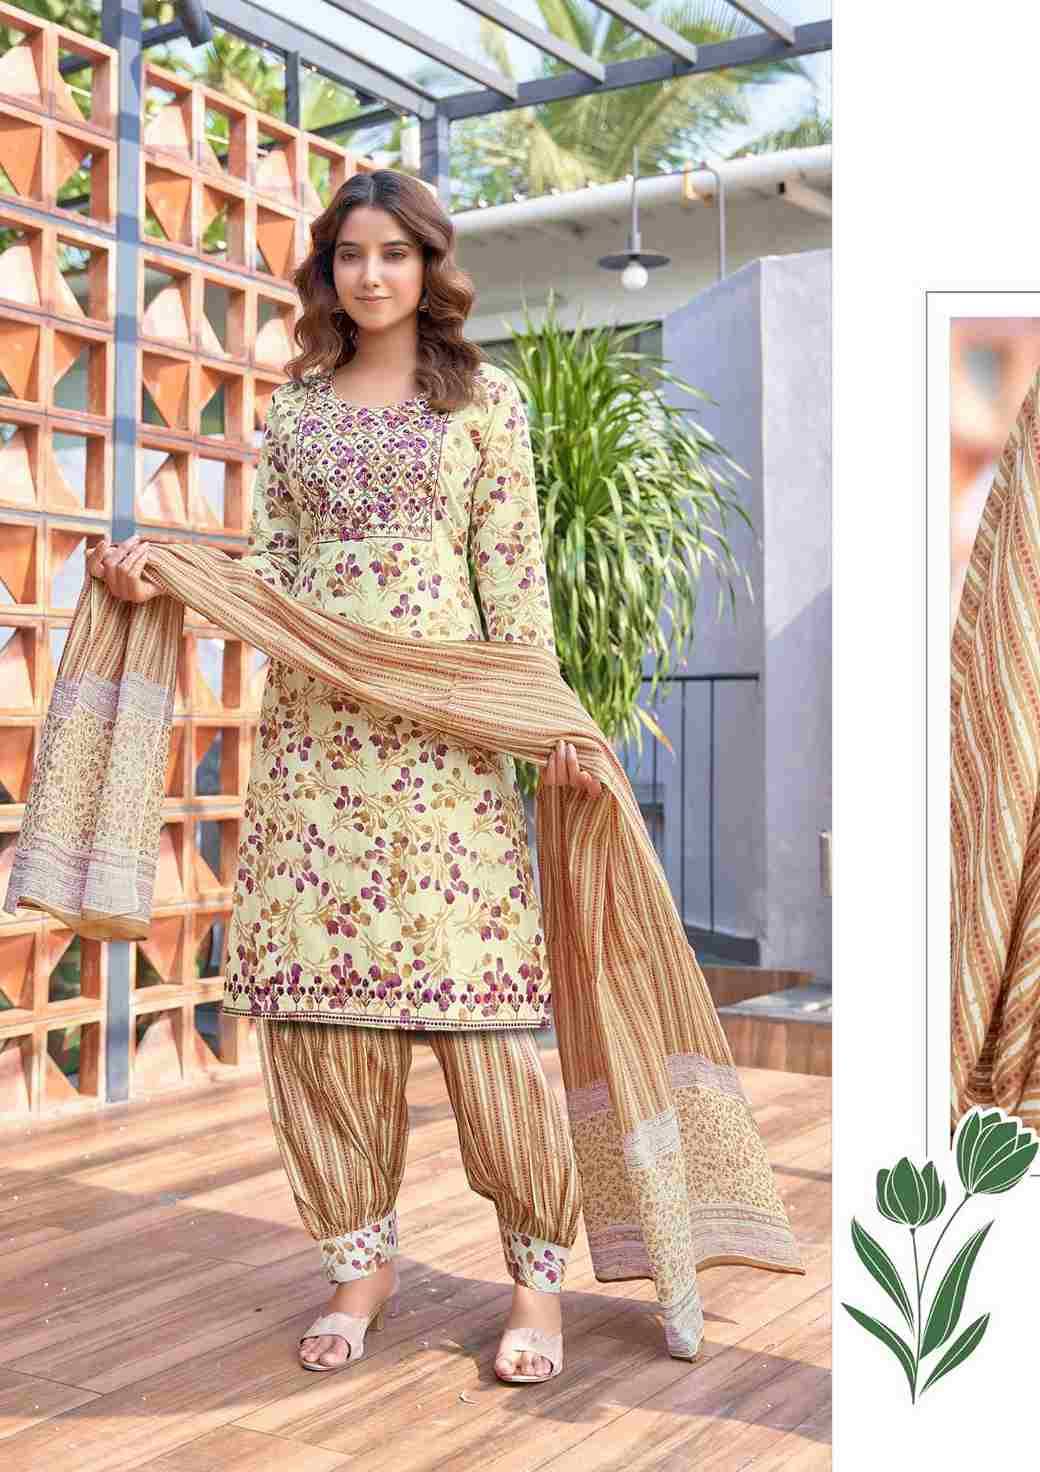 Guzarish By Yashika Trends 1001 To 1008 Series Beautiful Stylish Festive Suits Fancy Colorful Casual Wear & Ethnic Wear & Ready To Wear Heavy Cotton Embroidered Dresses At Wholesale Price